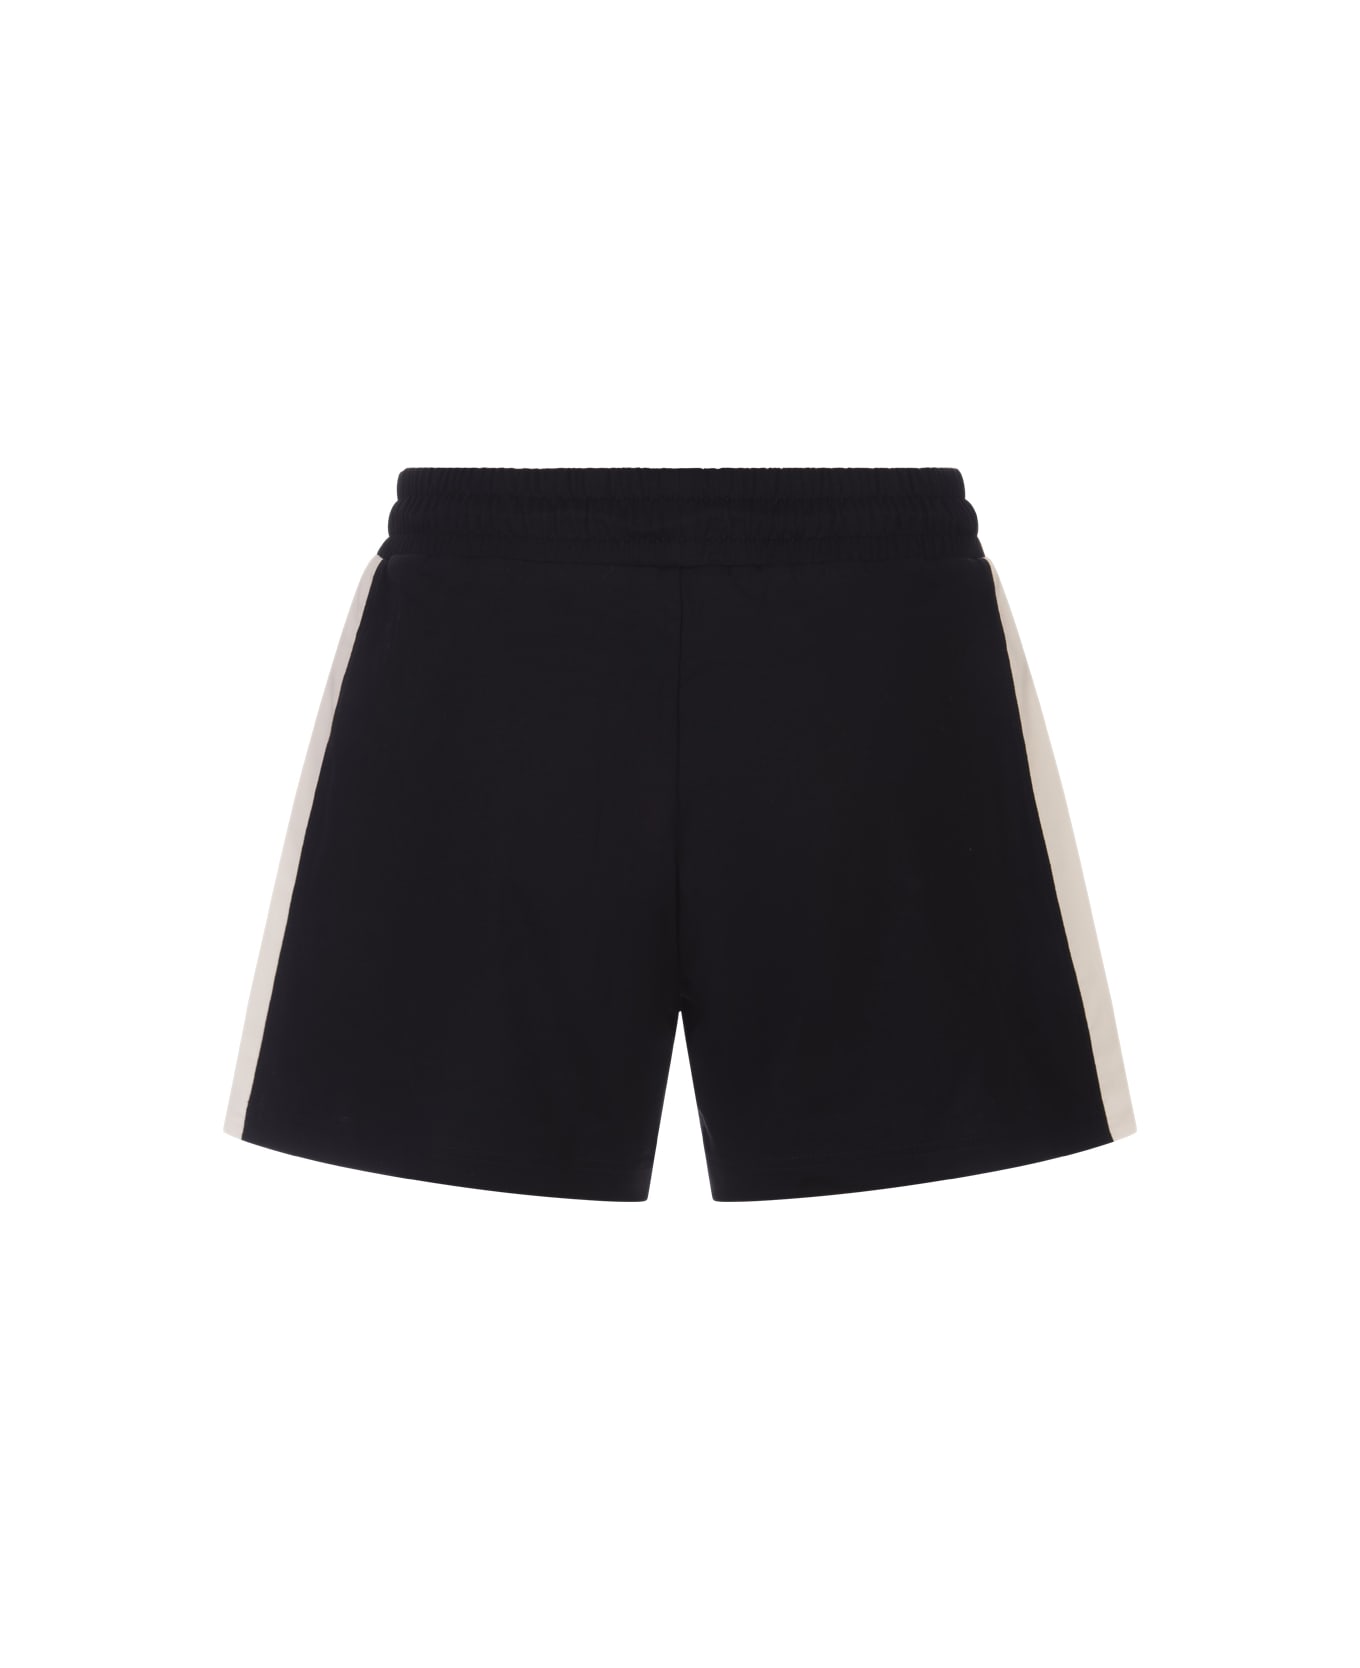 Moncler Navy Blue And White Jersey Shorts - Blue